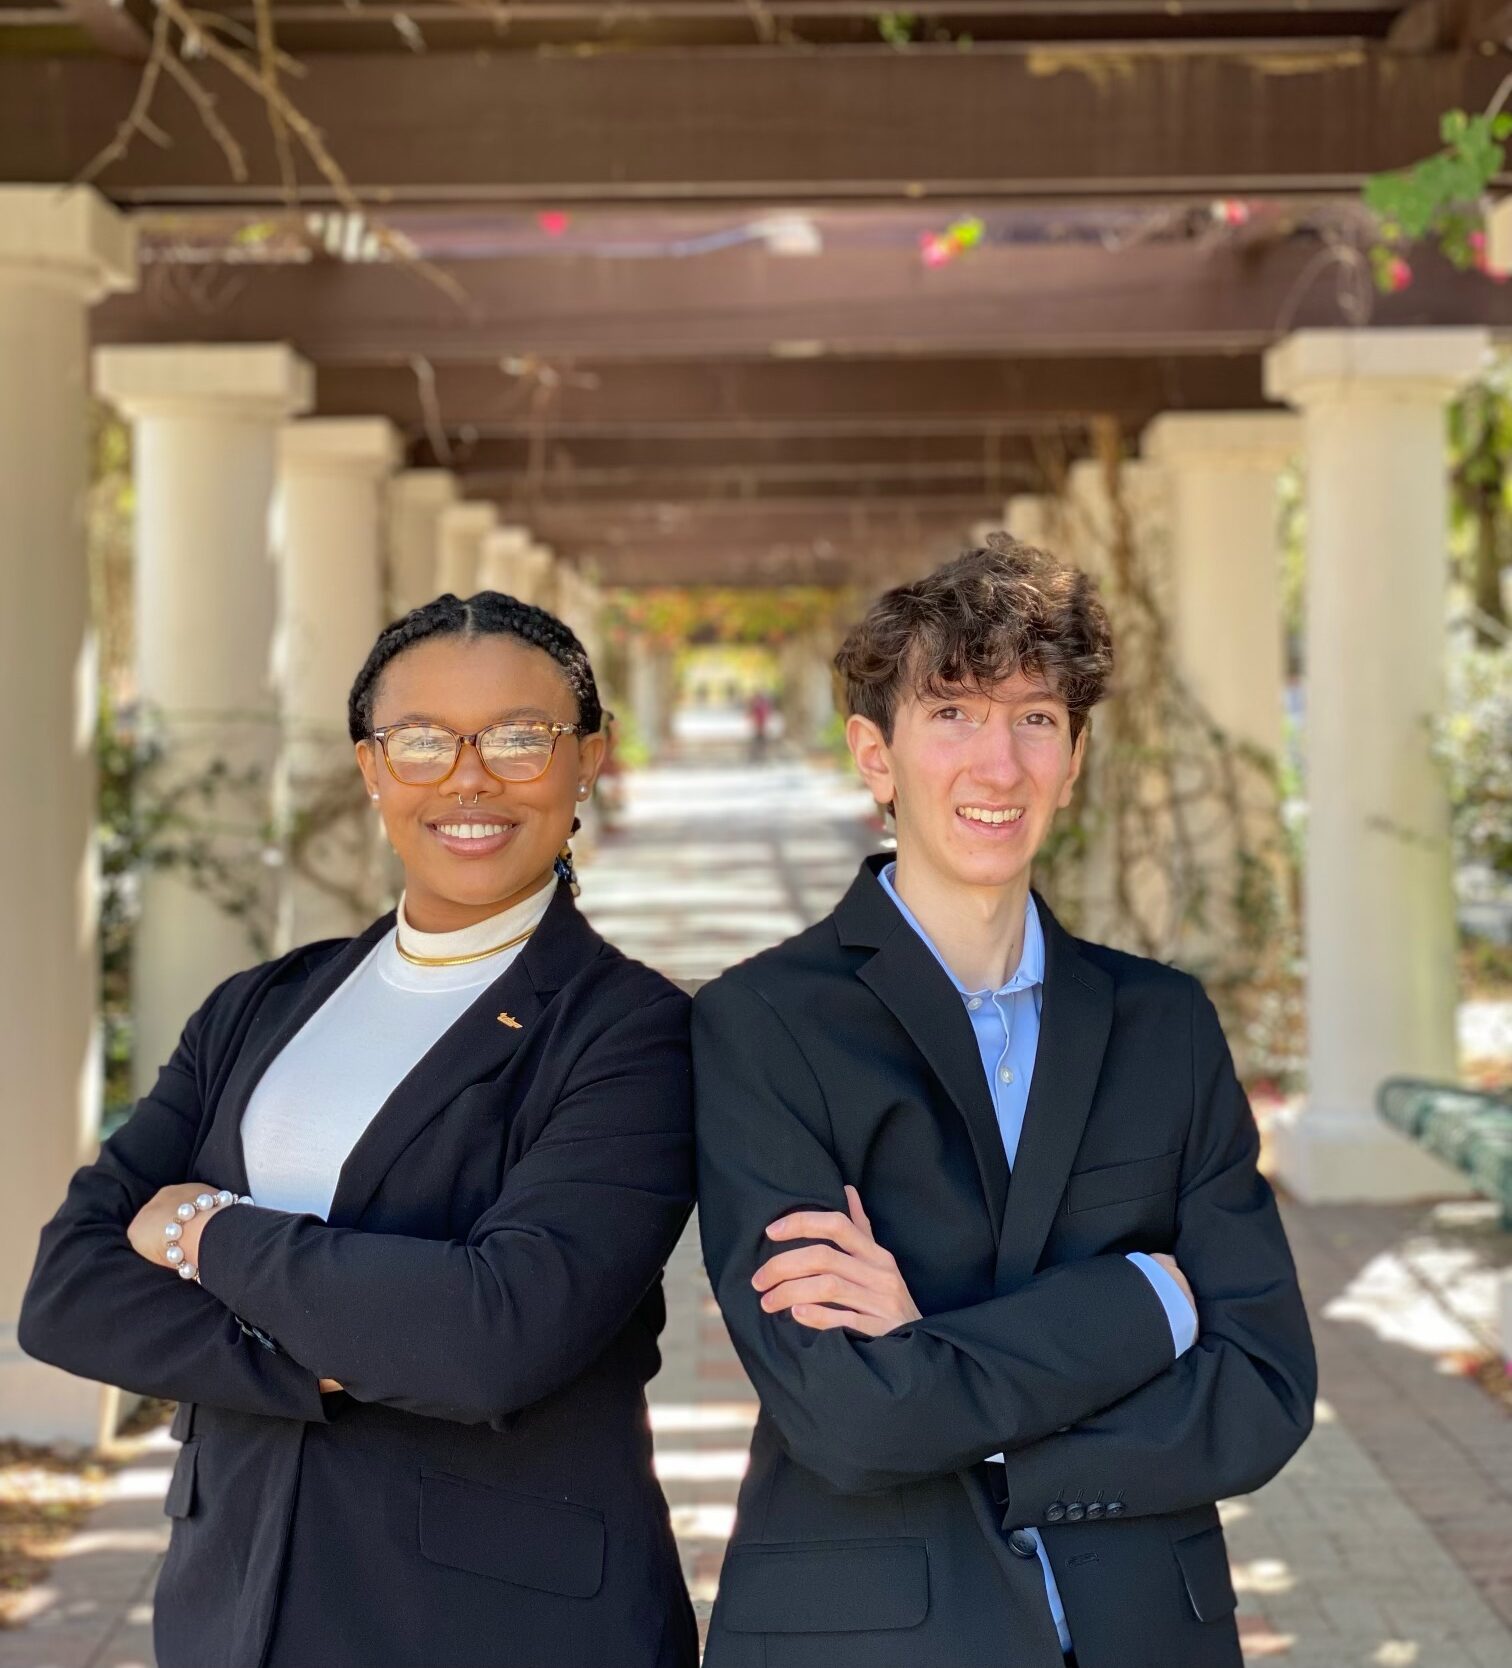 Joey Cipriano and Gabrielle Henry campaign on C.A.R.E. for Tampa campus governor, lieutenant governor